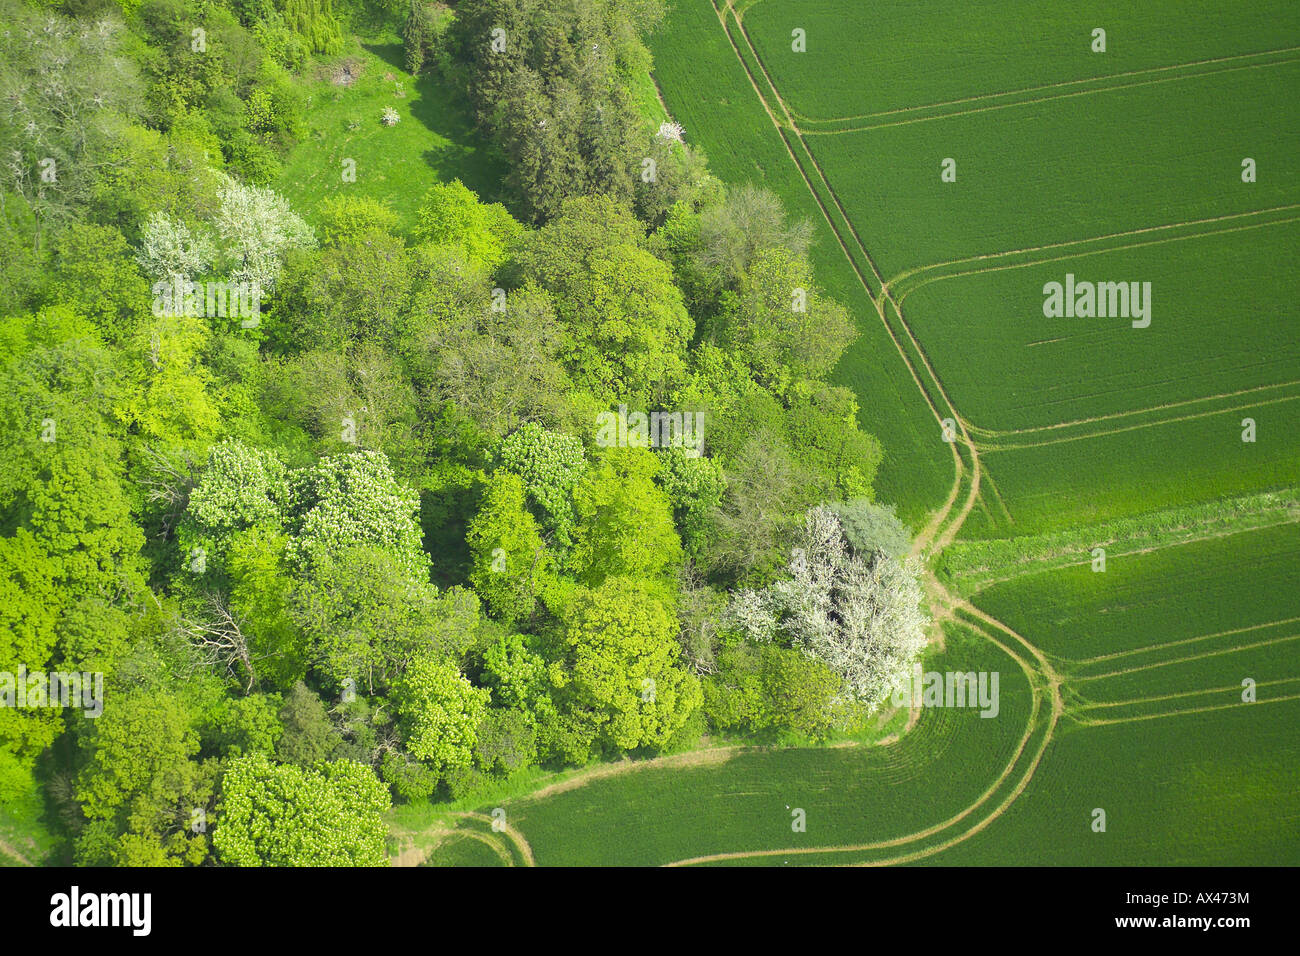 Aerial view of woodlands consisting of Deciduous and Coniferous Trees at the edge of a field Stock Photo